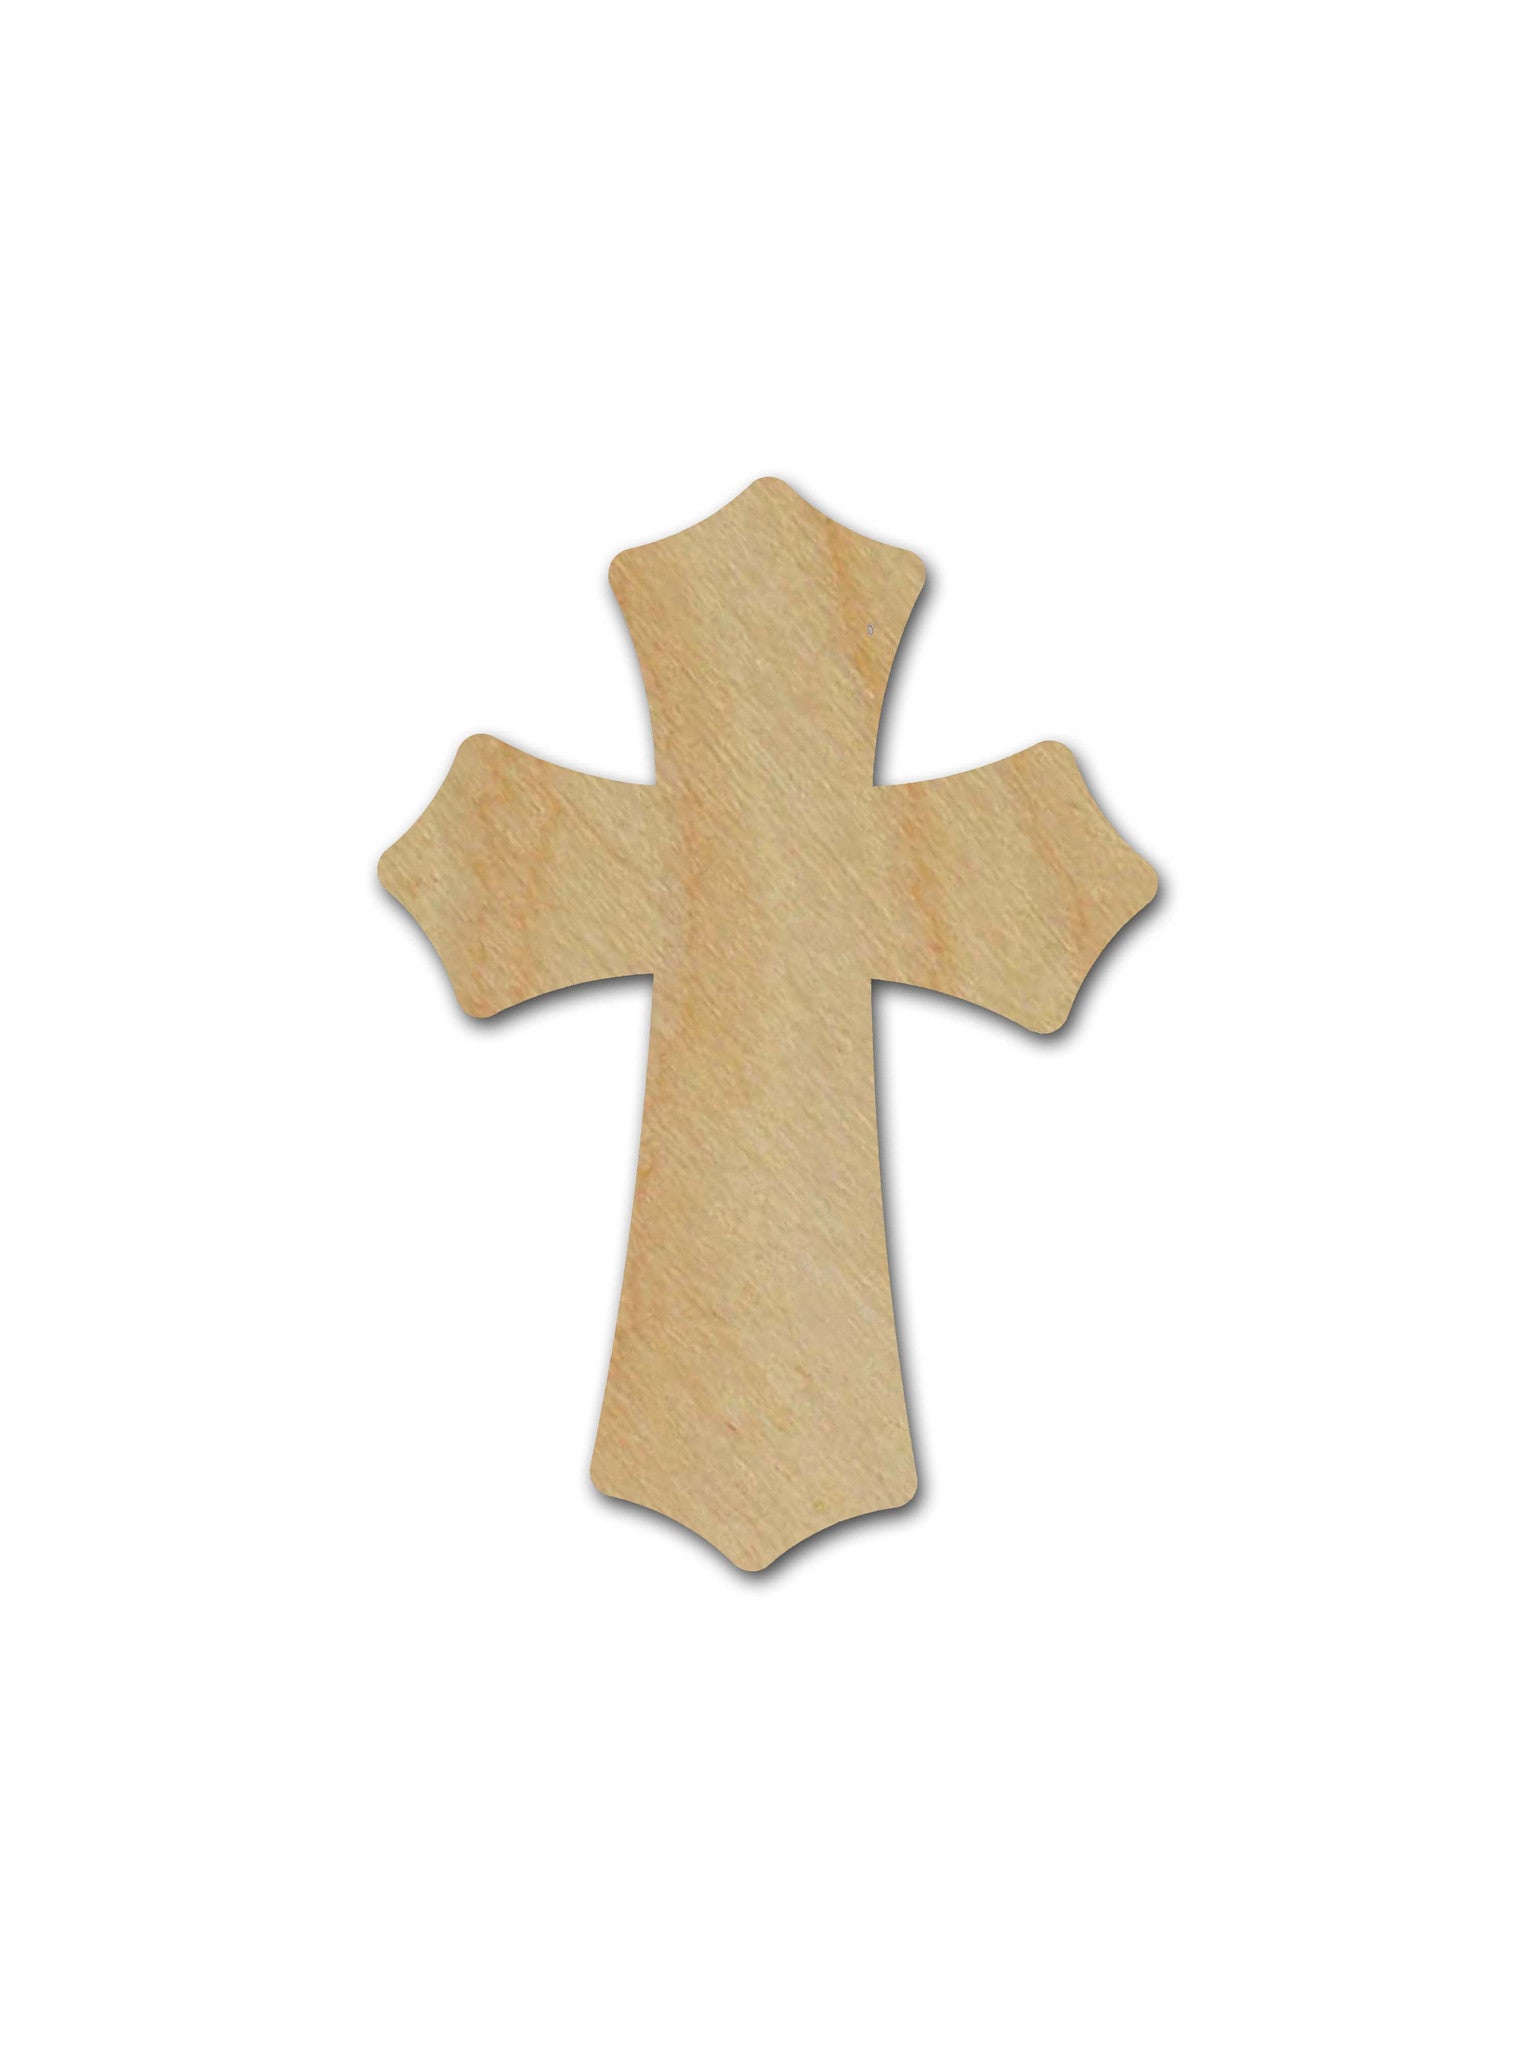 Unfinished Wood Cross MDF Craft Crosses Variety of Sizes C043